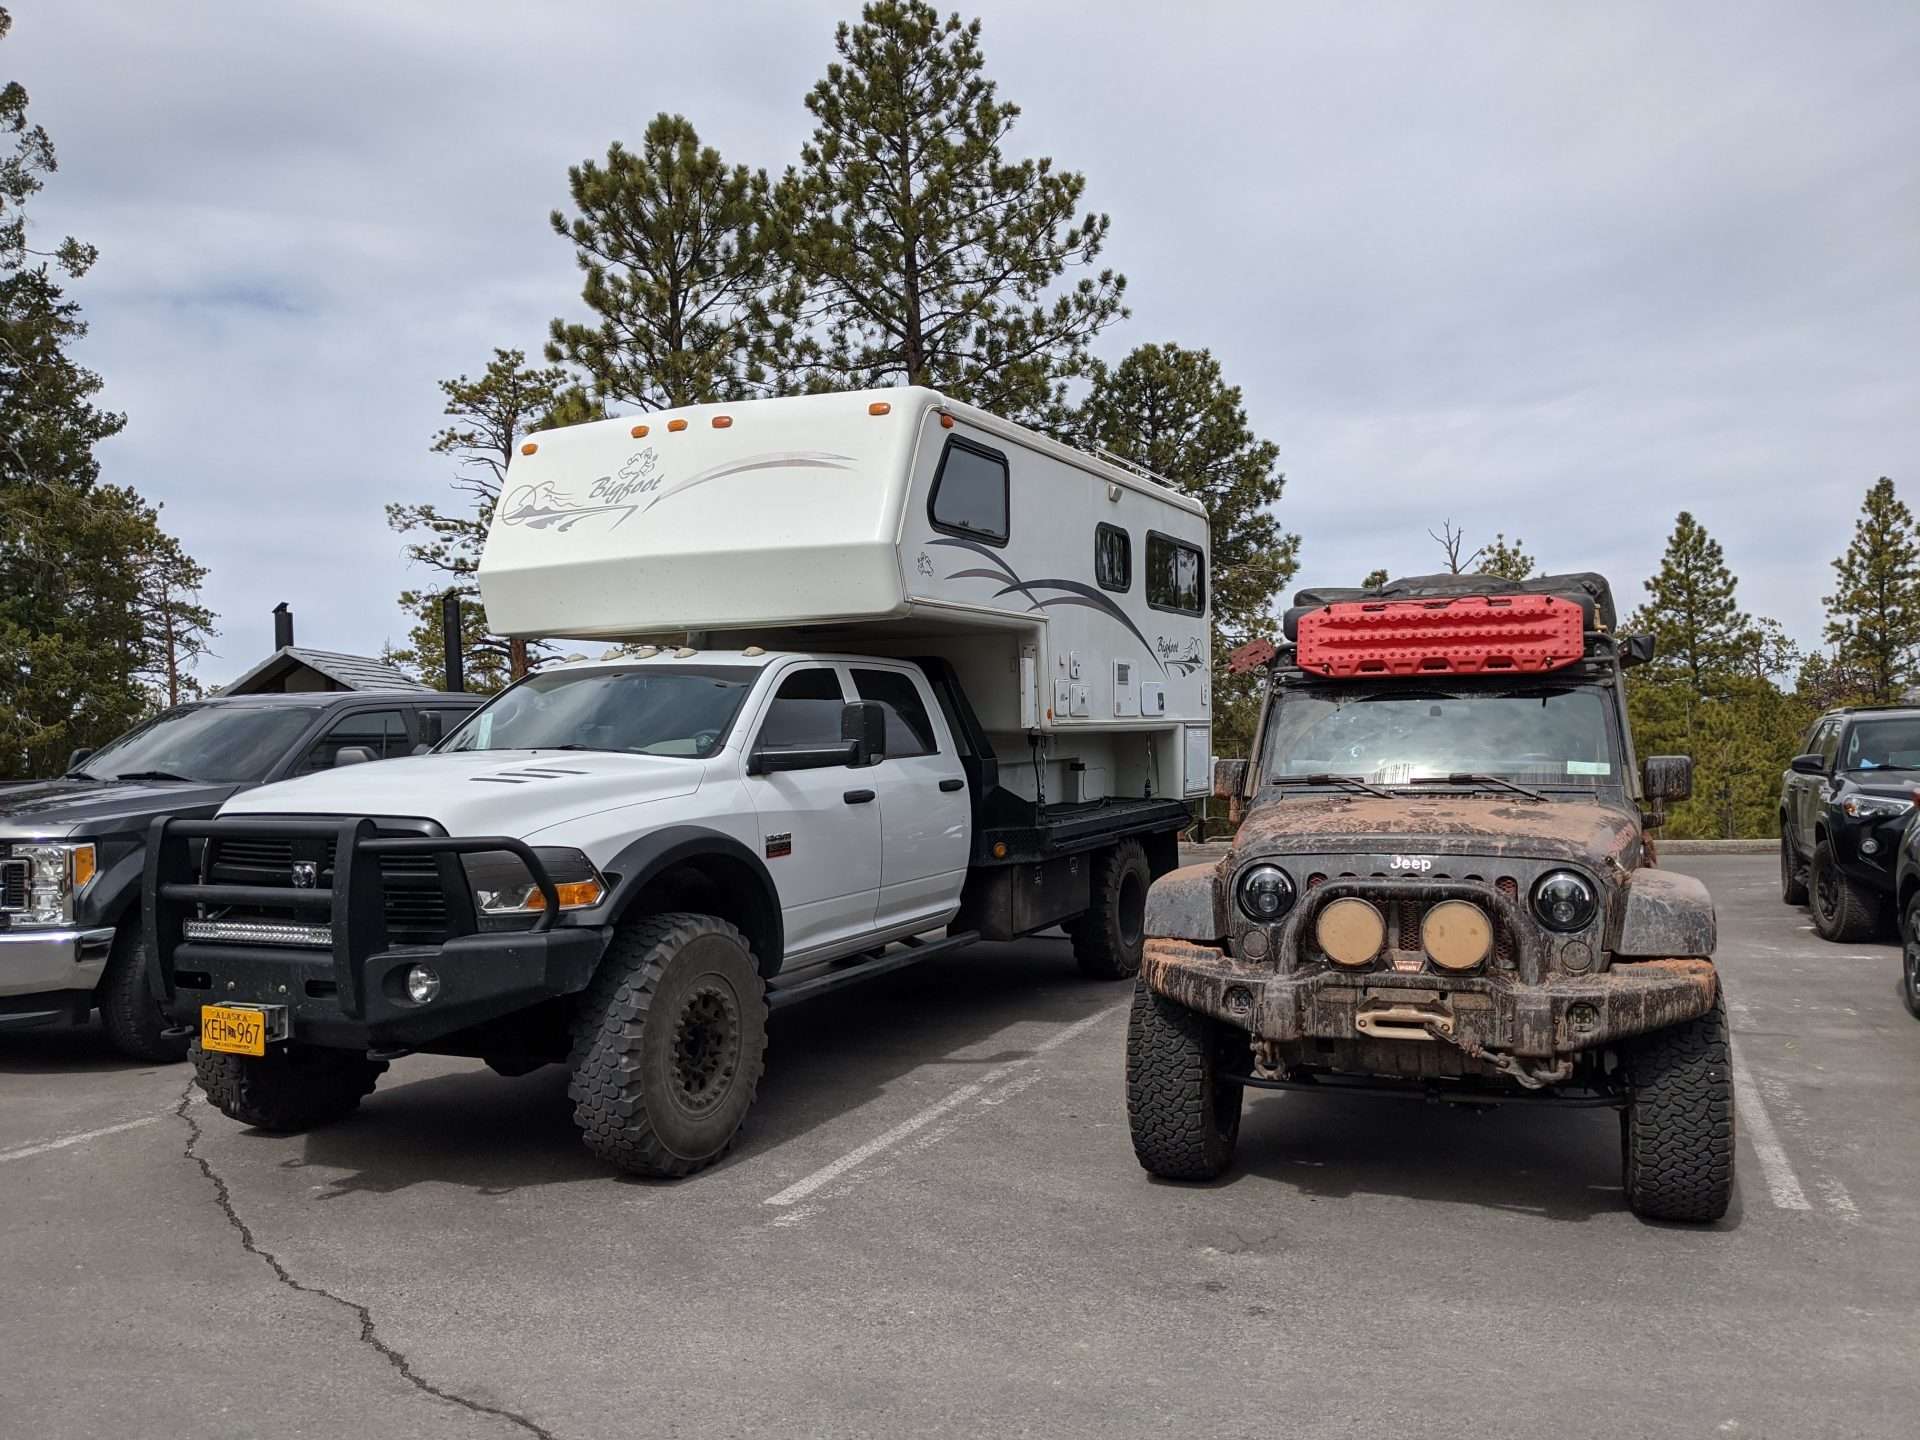 Overland truck camper next to off-road Jeep